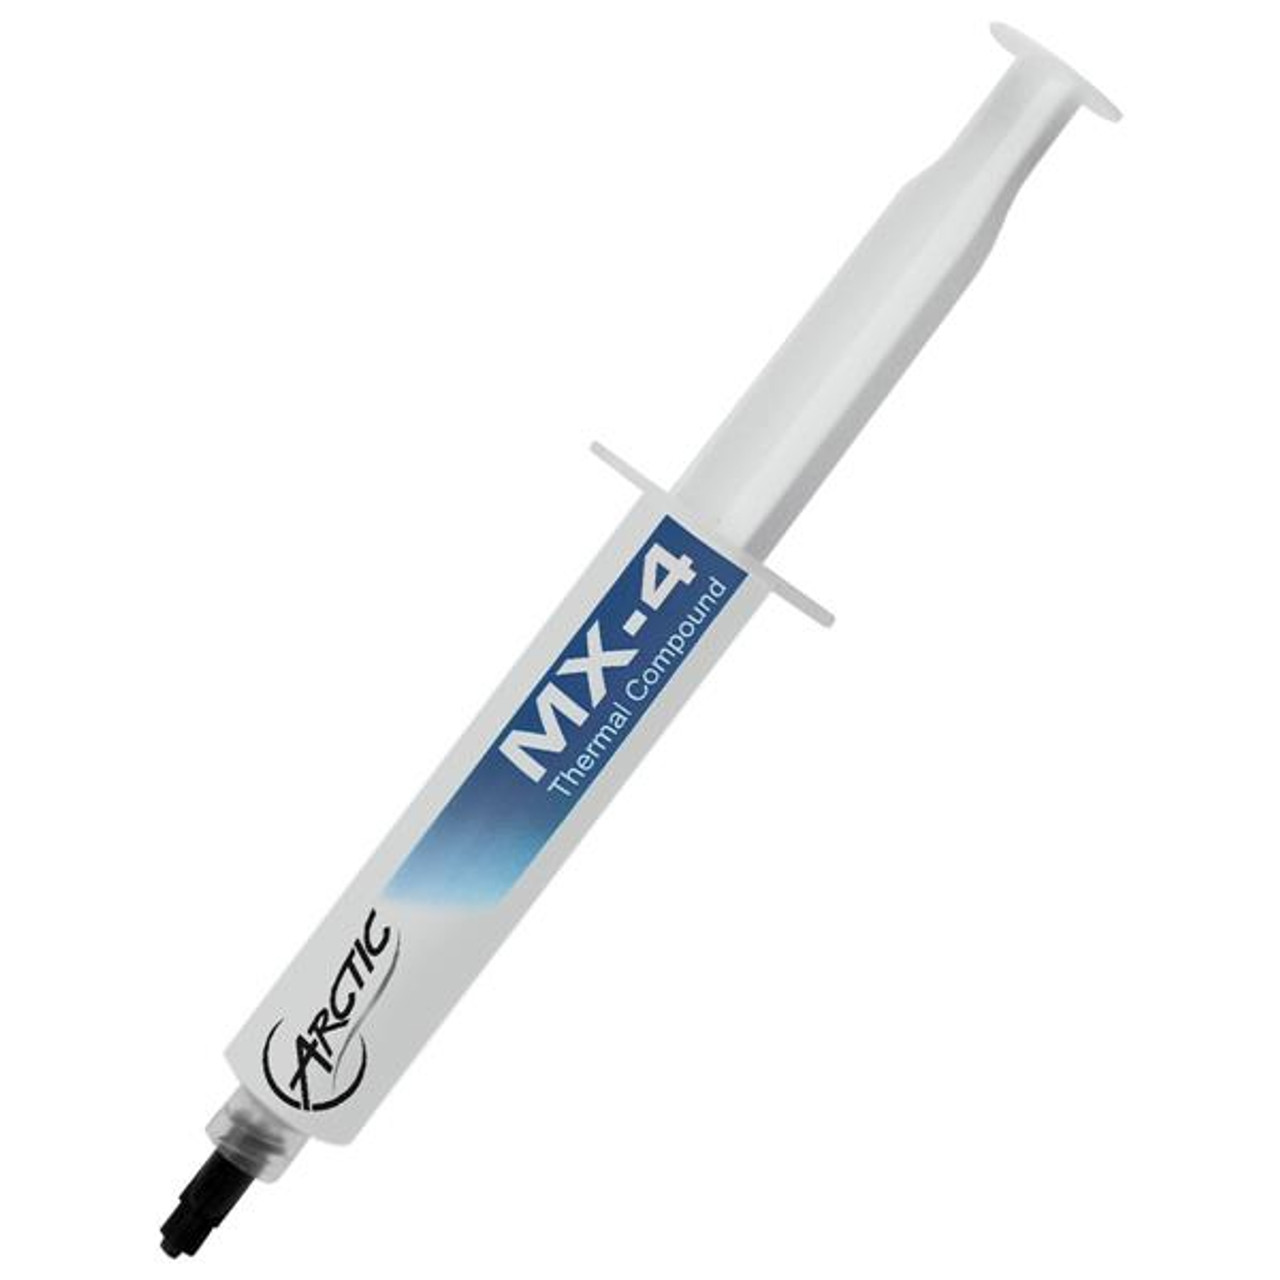 ACTC-MX4-20G Arctic Cooling Arctic Mx-4 20g Carbon-based Thermal Compound Non-electricity C